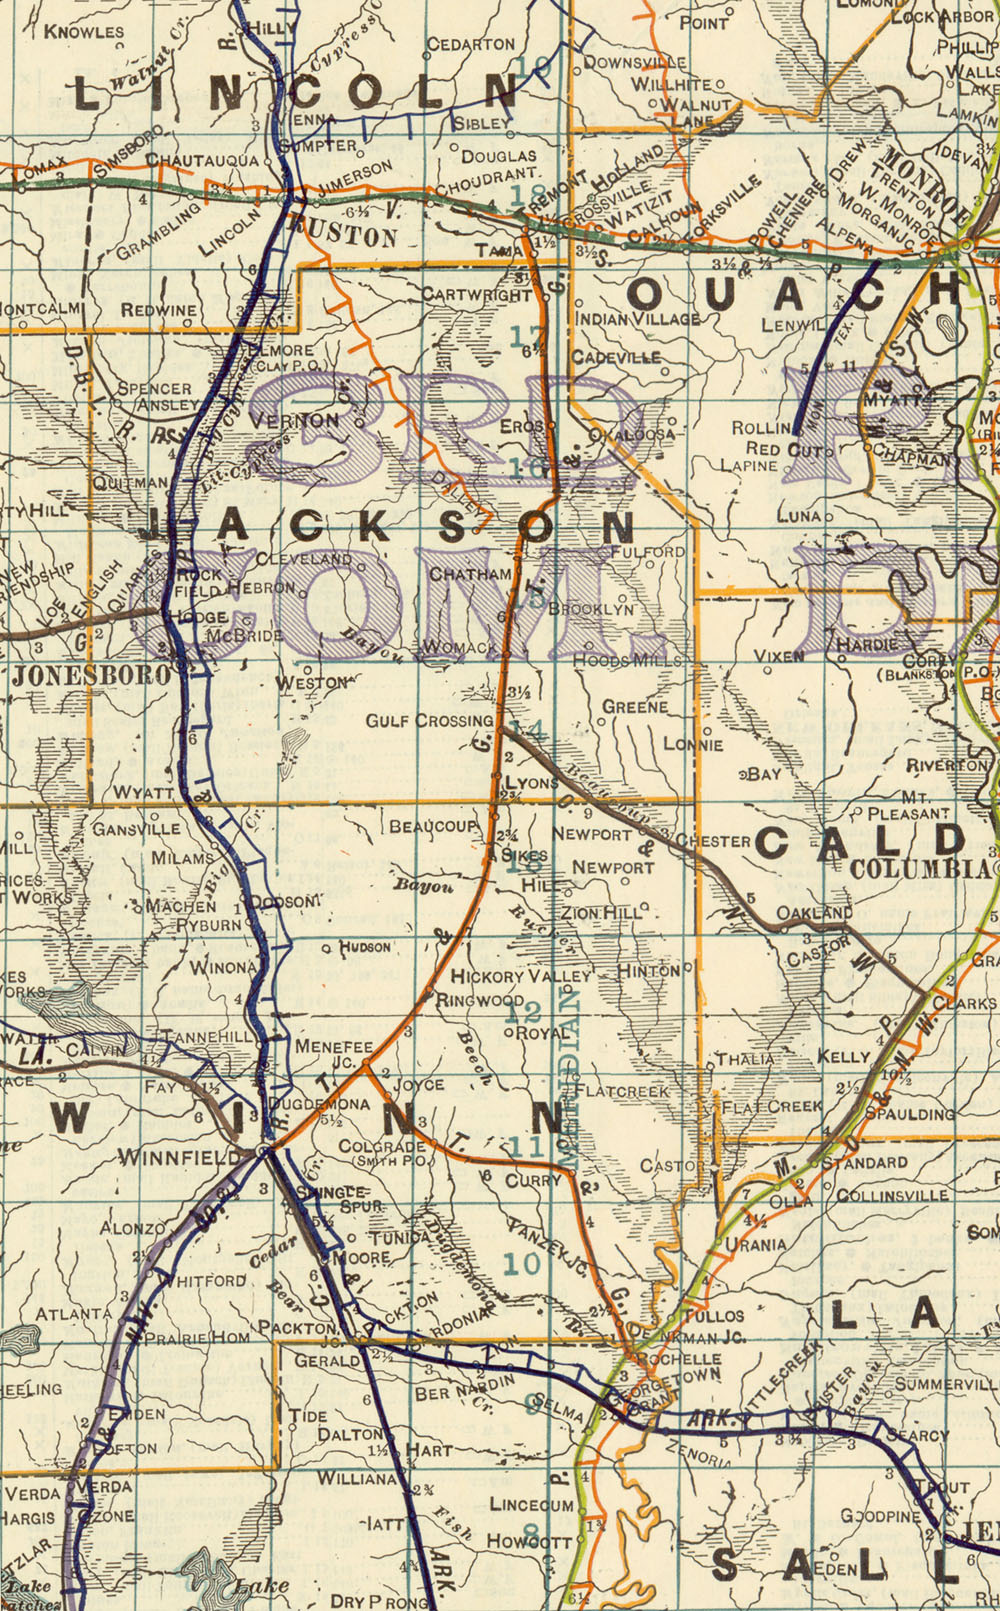 Tremont & Gulf Railway Company (La.), Map Showing Route in 1922.